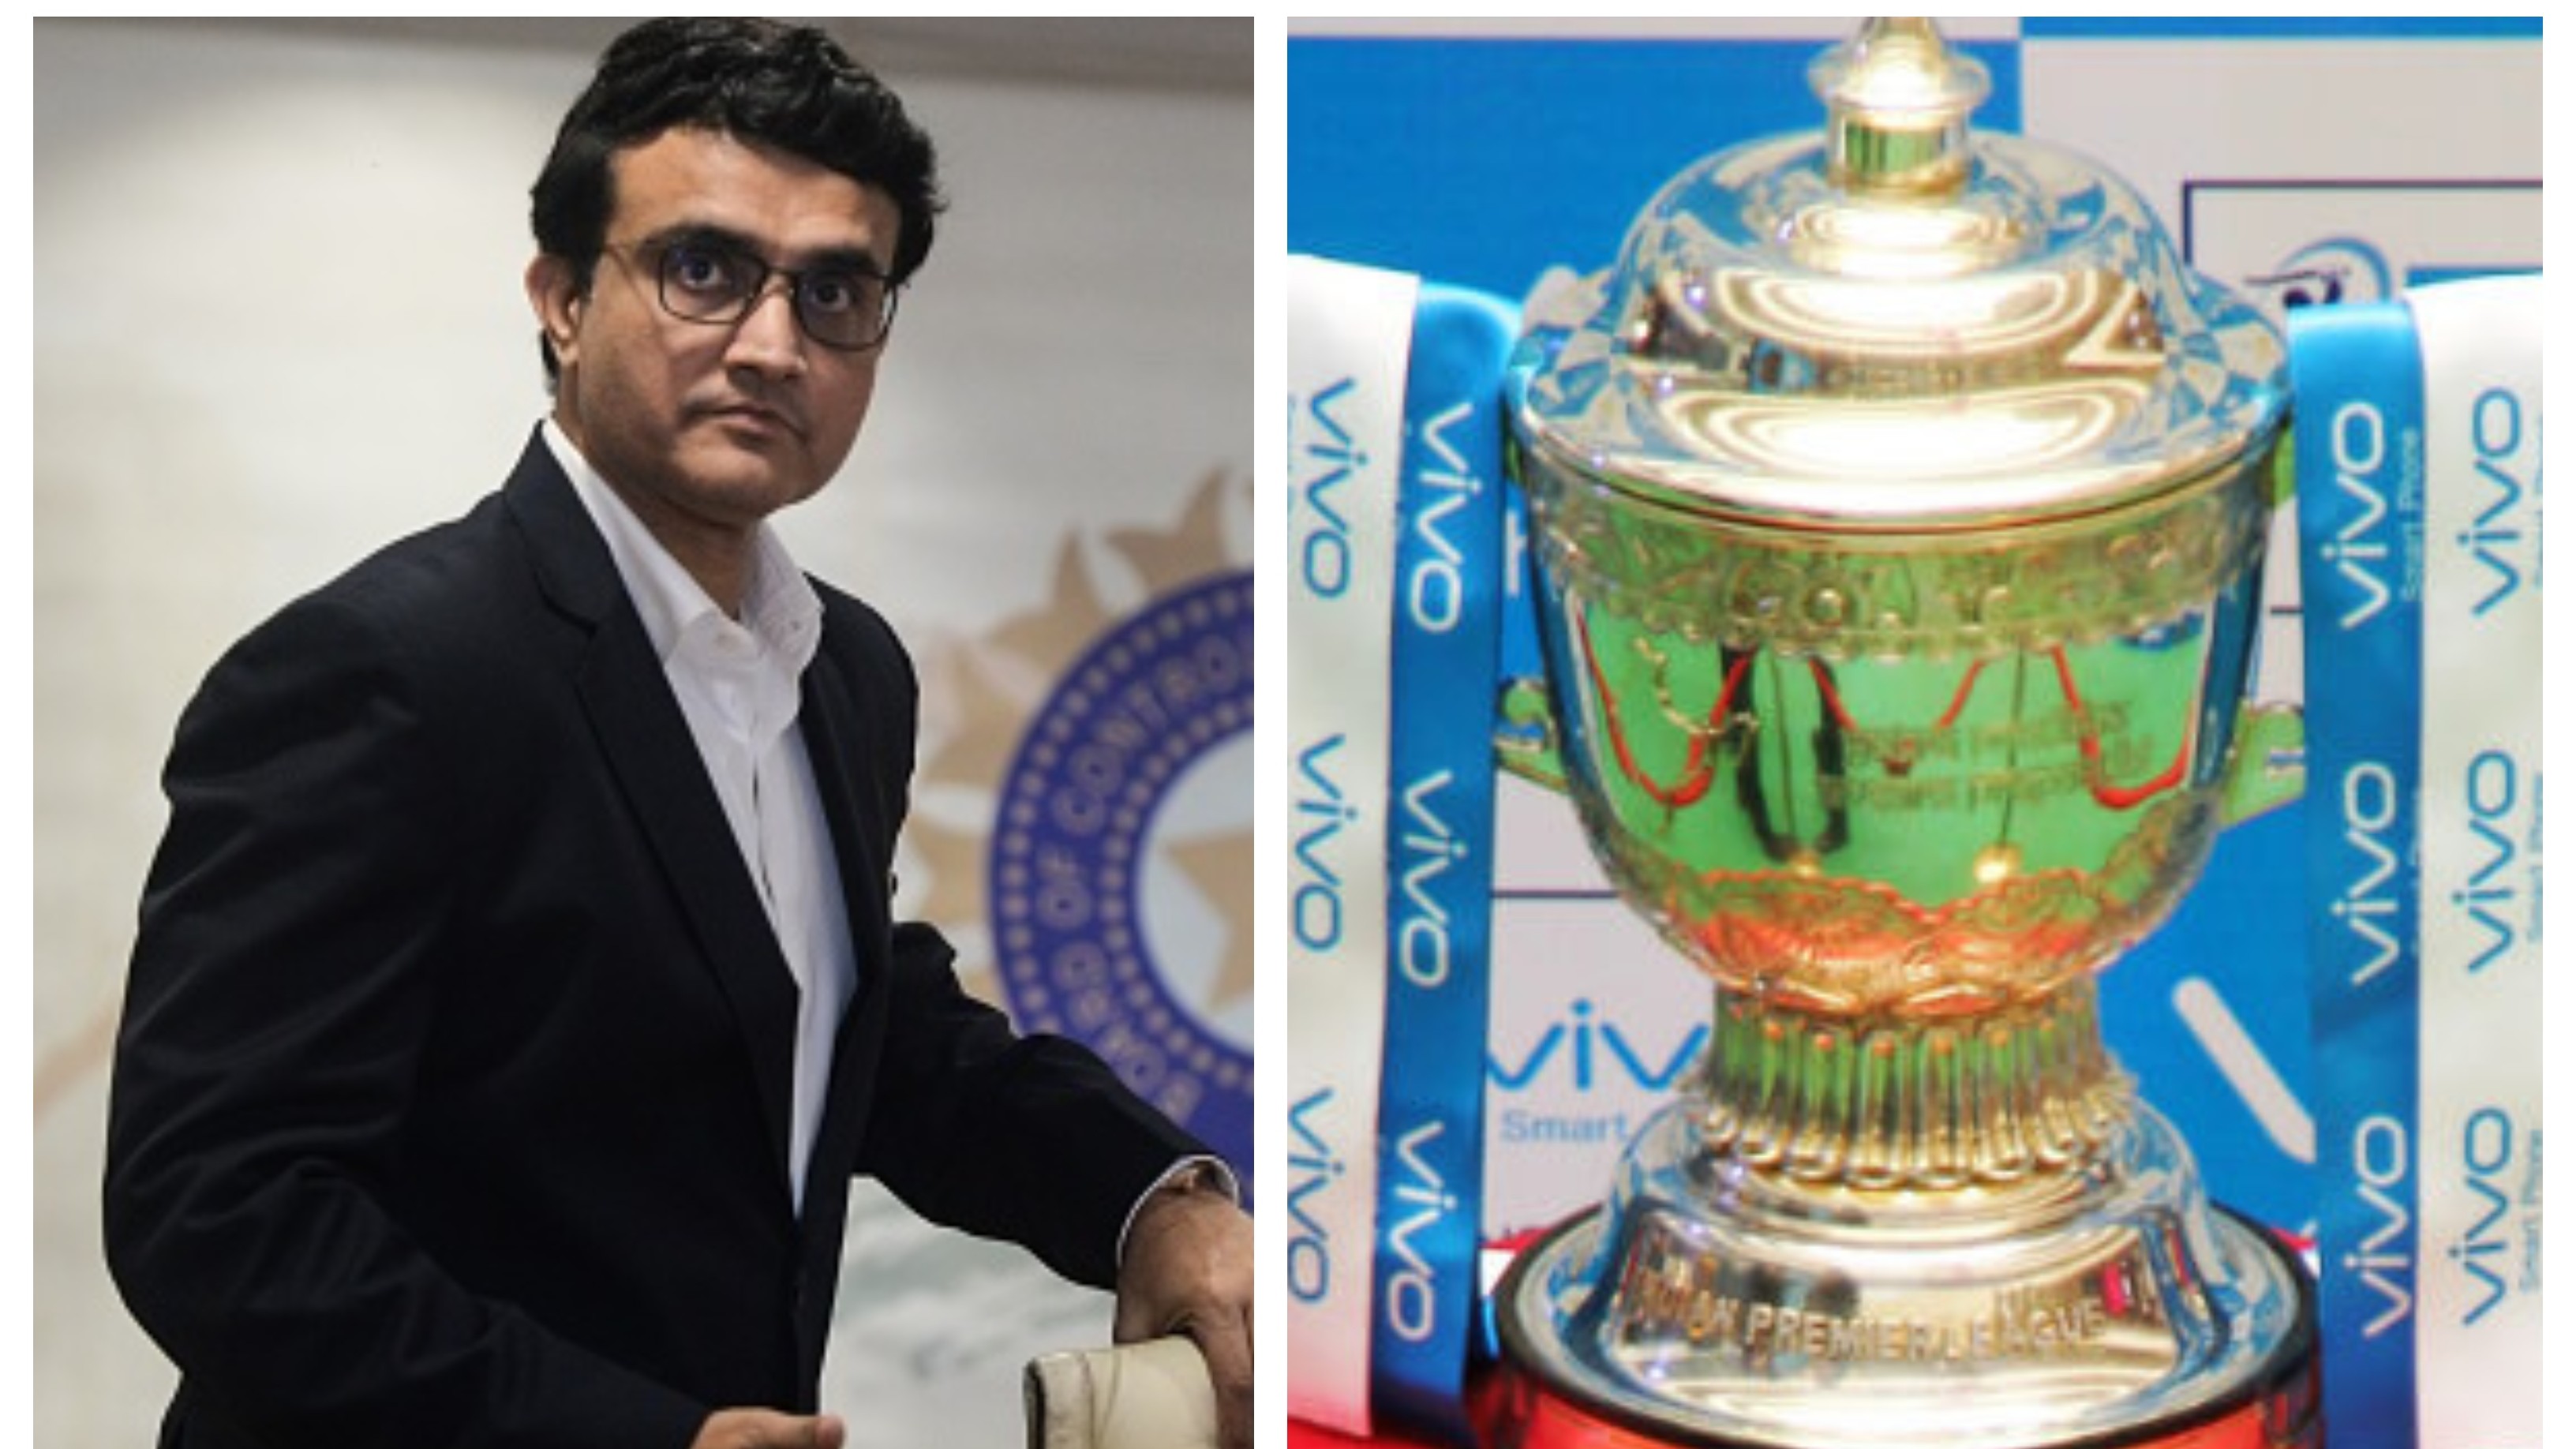 IPL 2020: “I would not call it a financial crisis”, Ganguly on Vivo’s exit as title sponsor for this year’s IPL